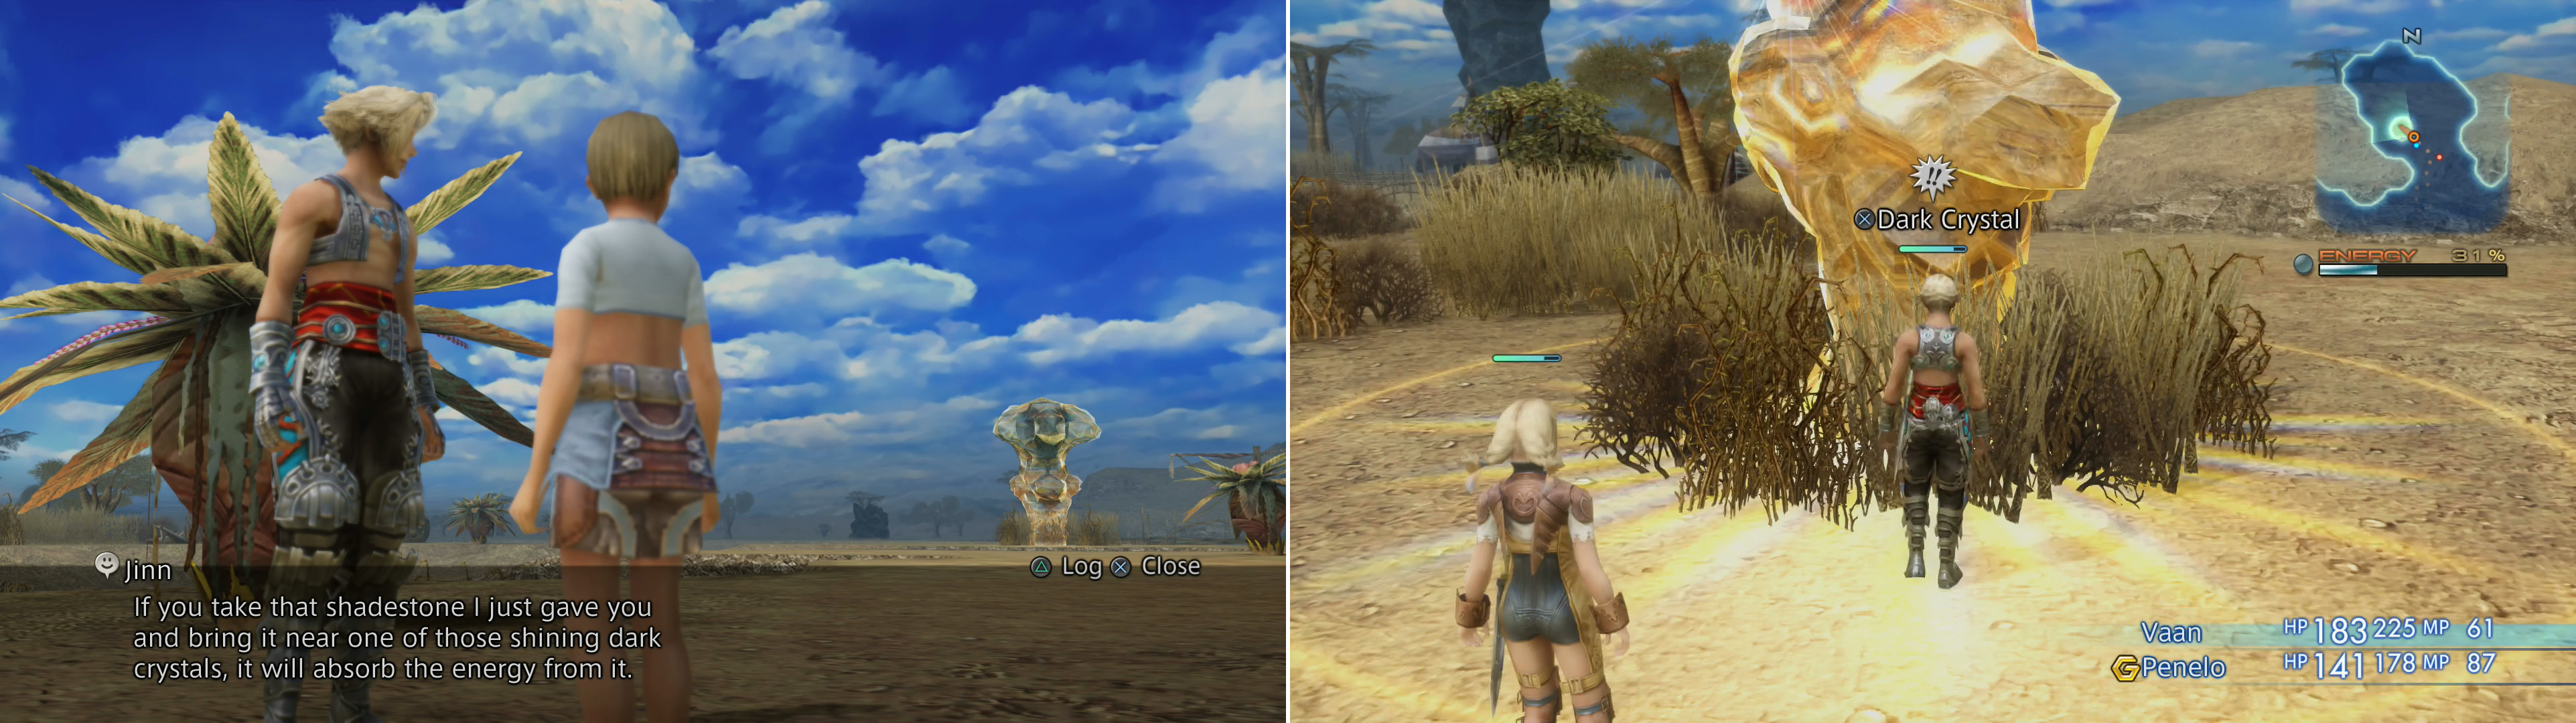 Find Jinn in the Crystal Glade area, where you’ll find Jinn (left). After he gives you a Shadestone and tells you want to do - find the dark crystals aound the Giza Plains and use them to create a Sunstone (right).